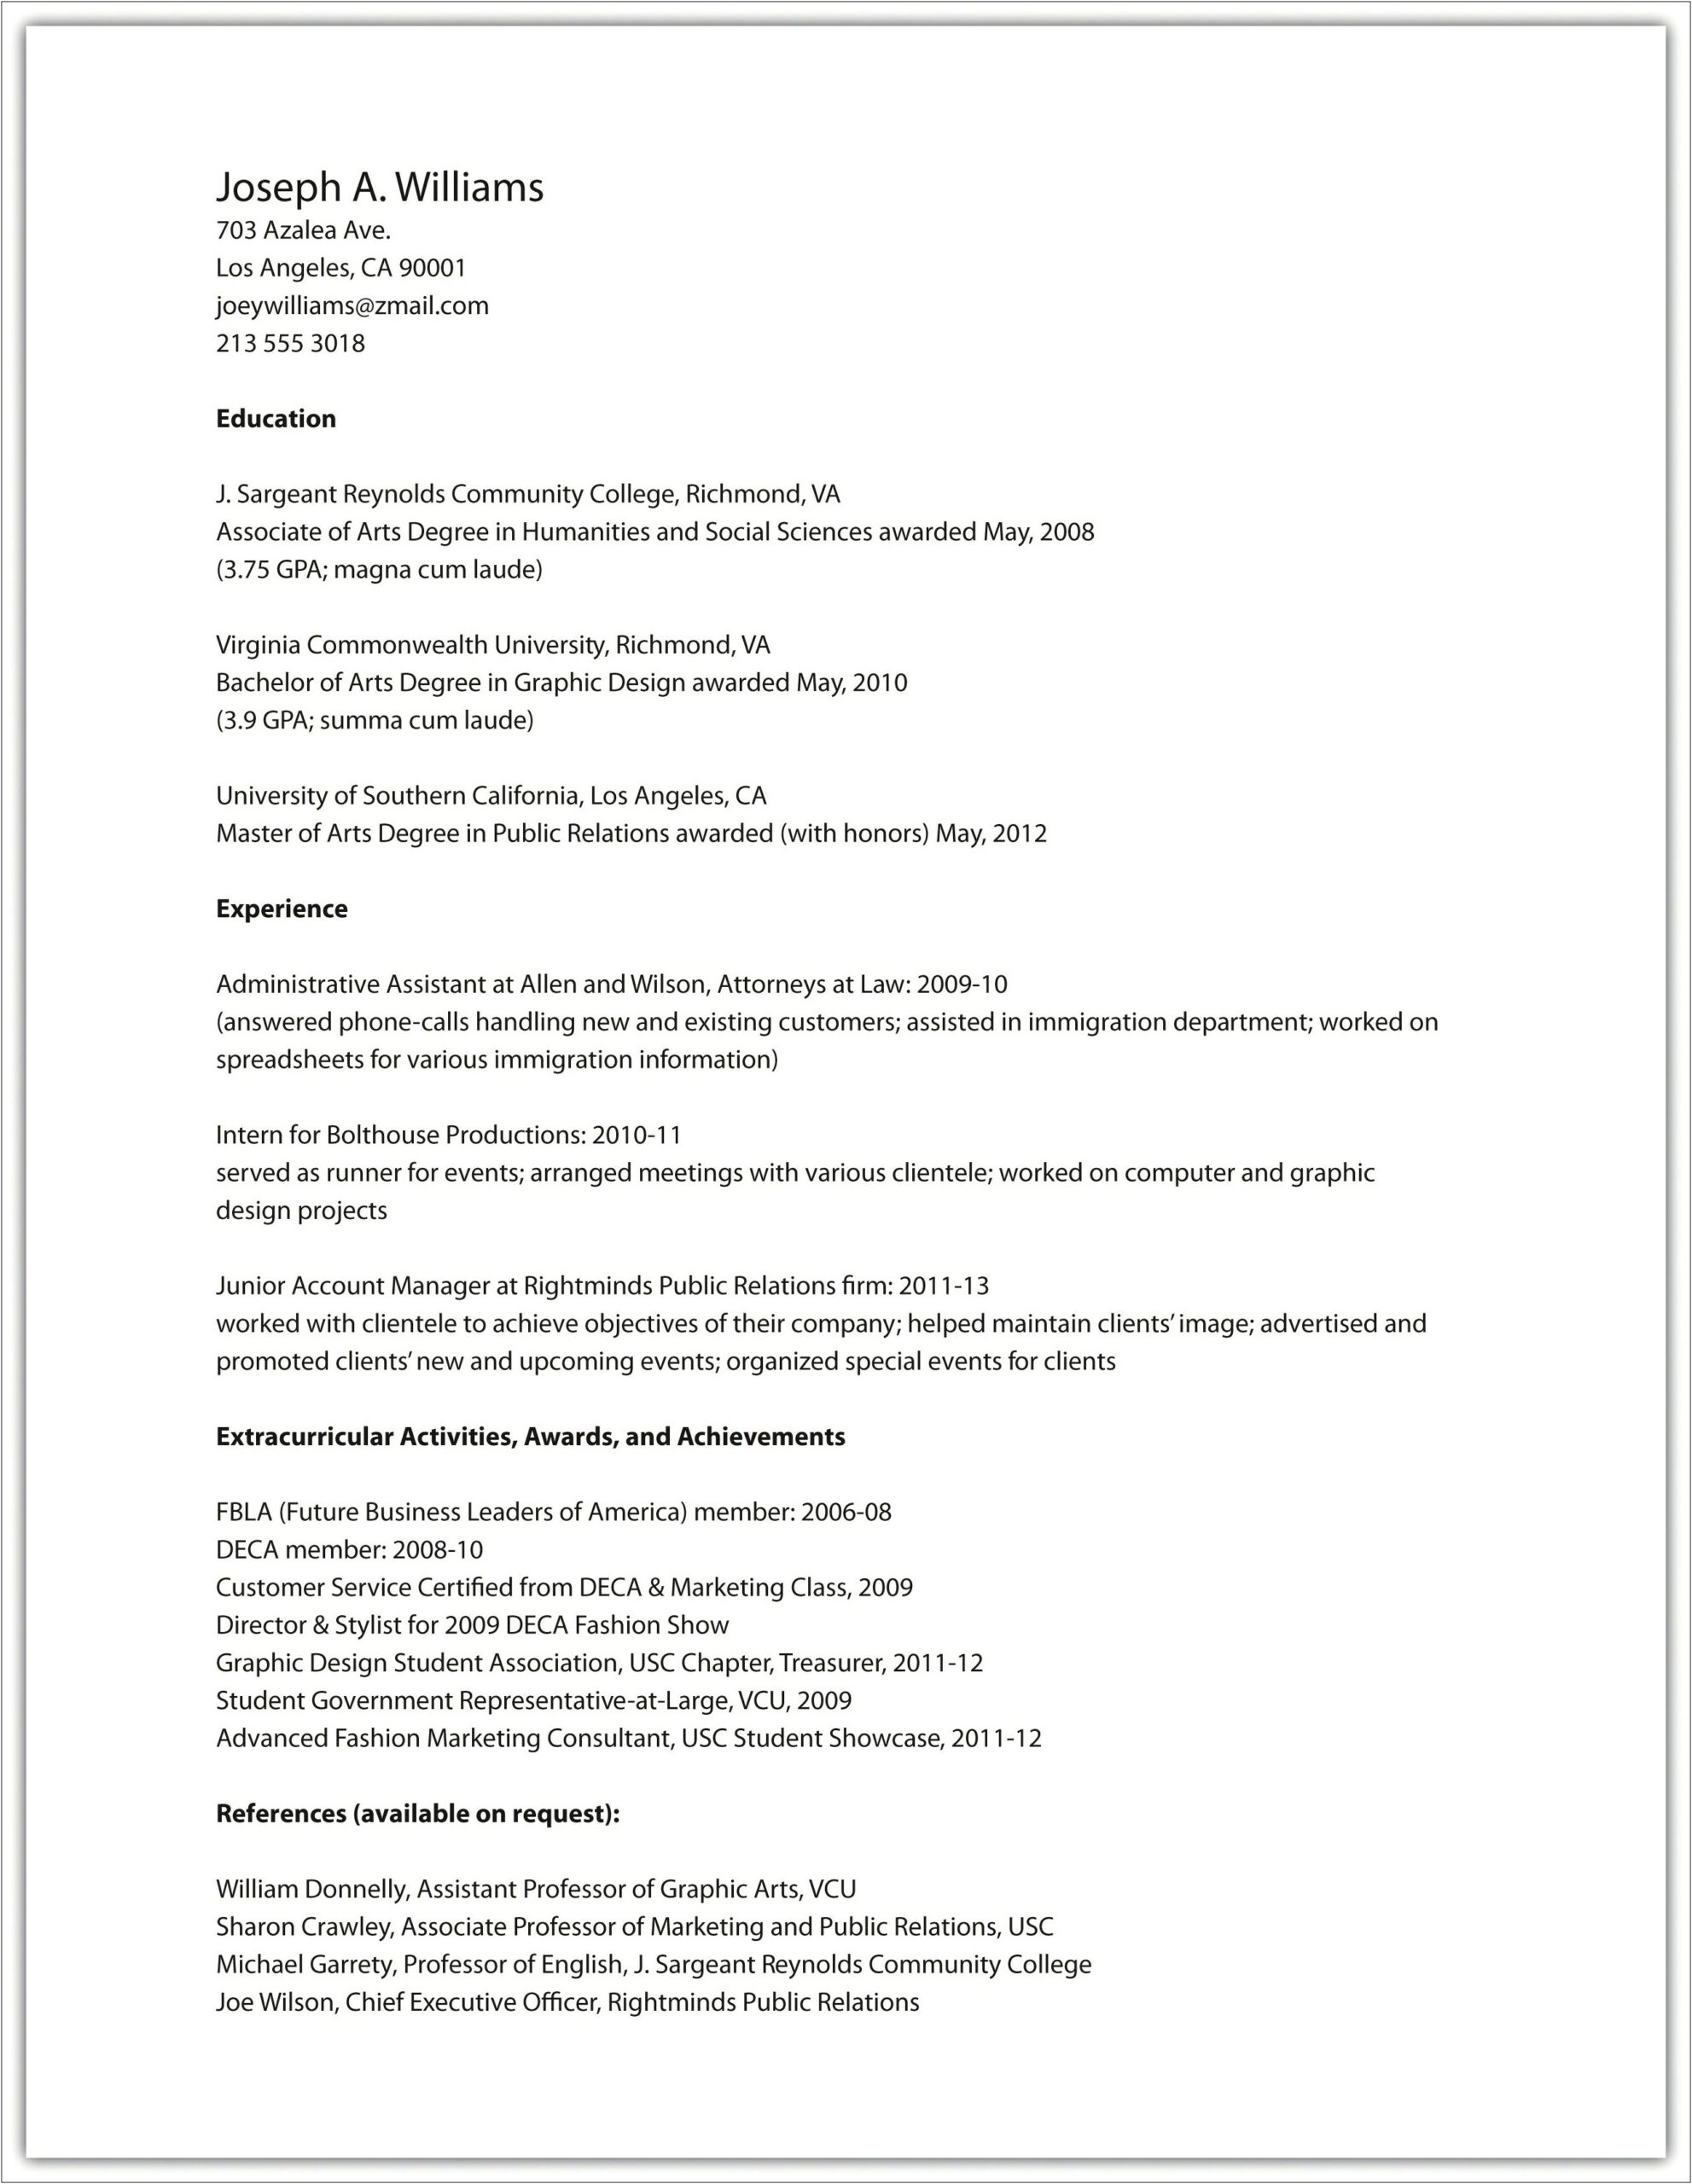 Sample Resume With Awards And Accomplishments